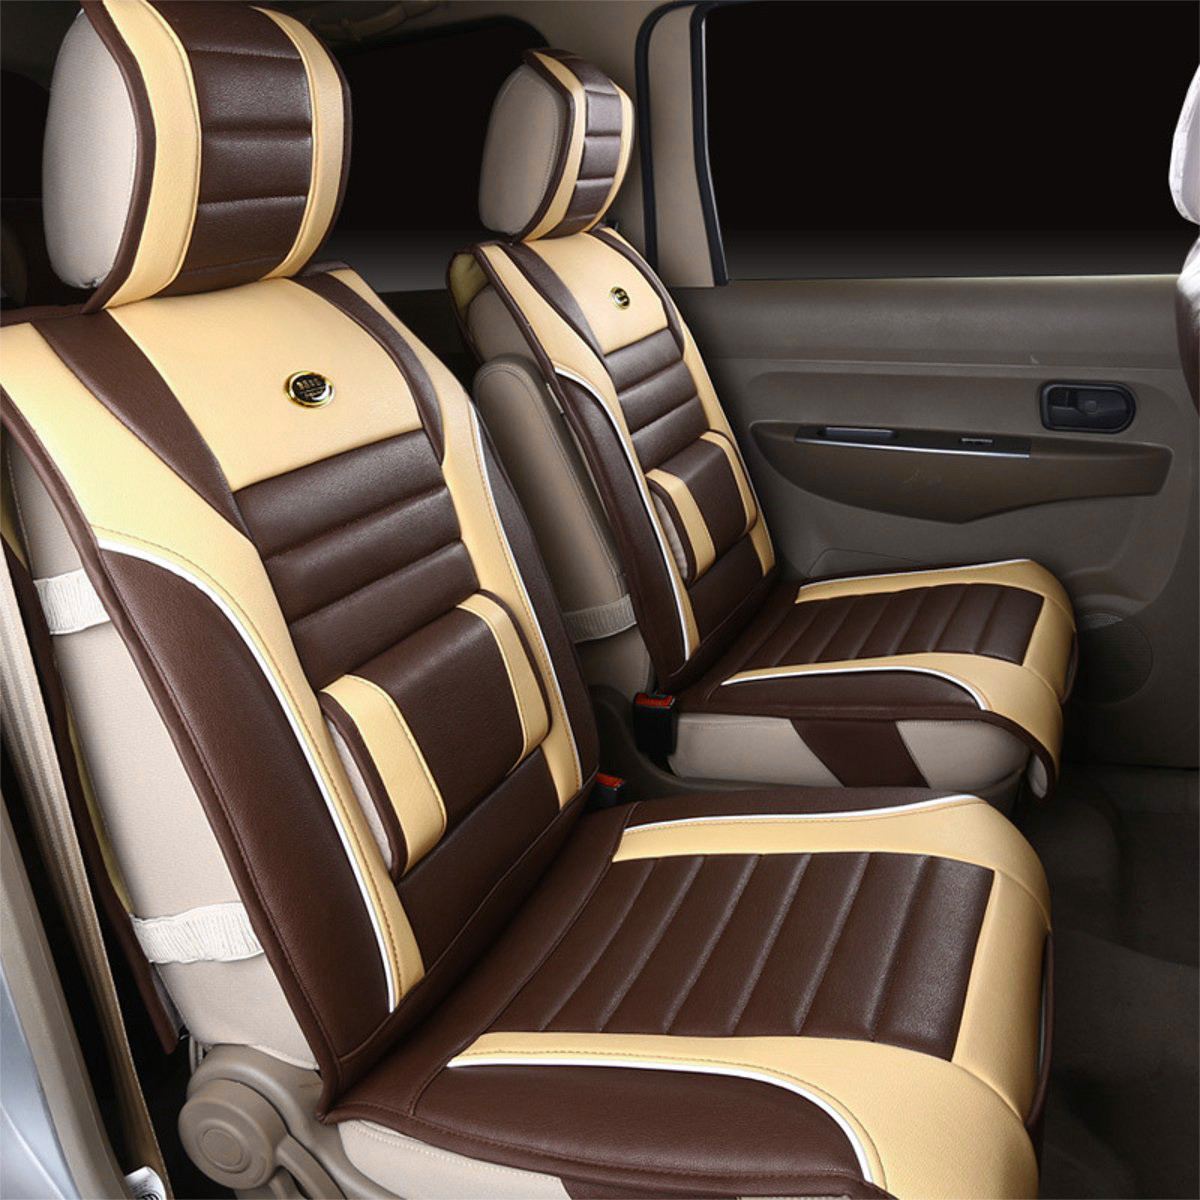 1Pcs-PU-Leather-Car-Front-Seat-Cover-Support-Cushion-Pad-Full-Surround-7-Seat-Universal-1360050